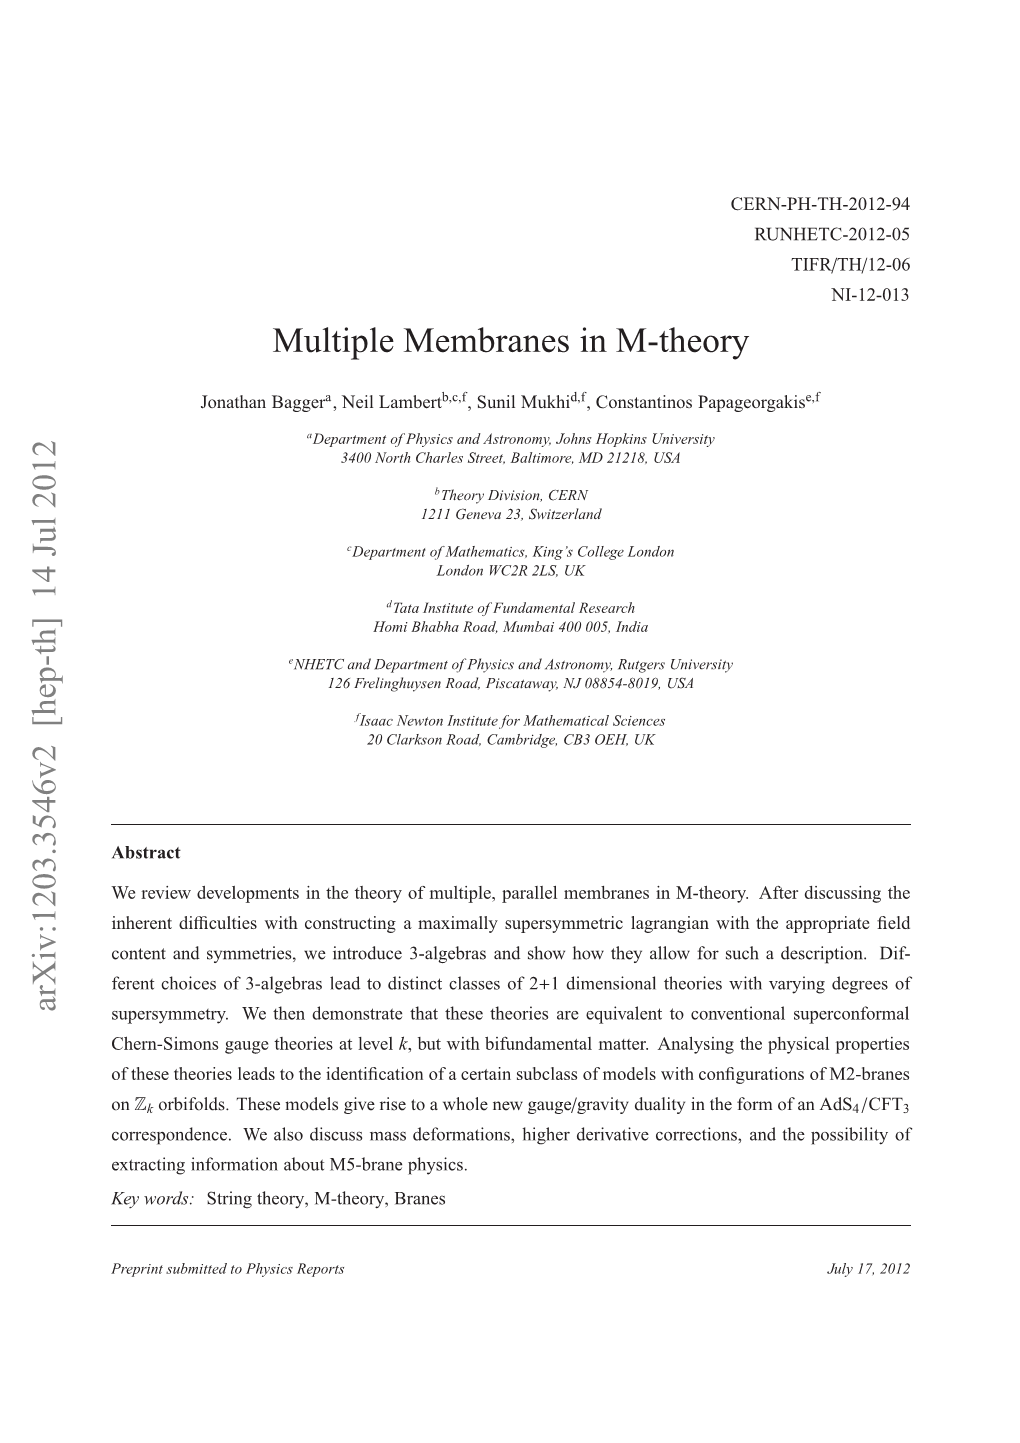 Multiple Membranes in M-Theory